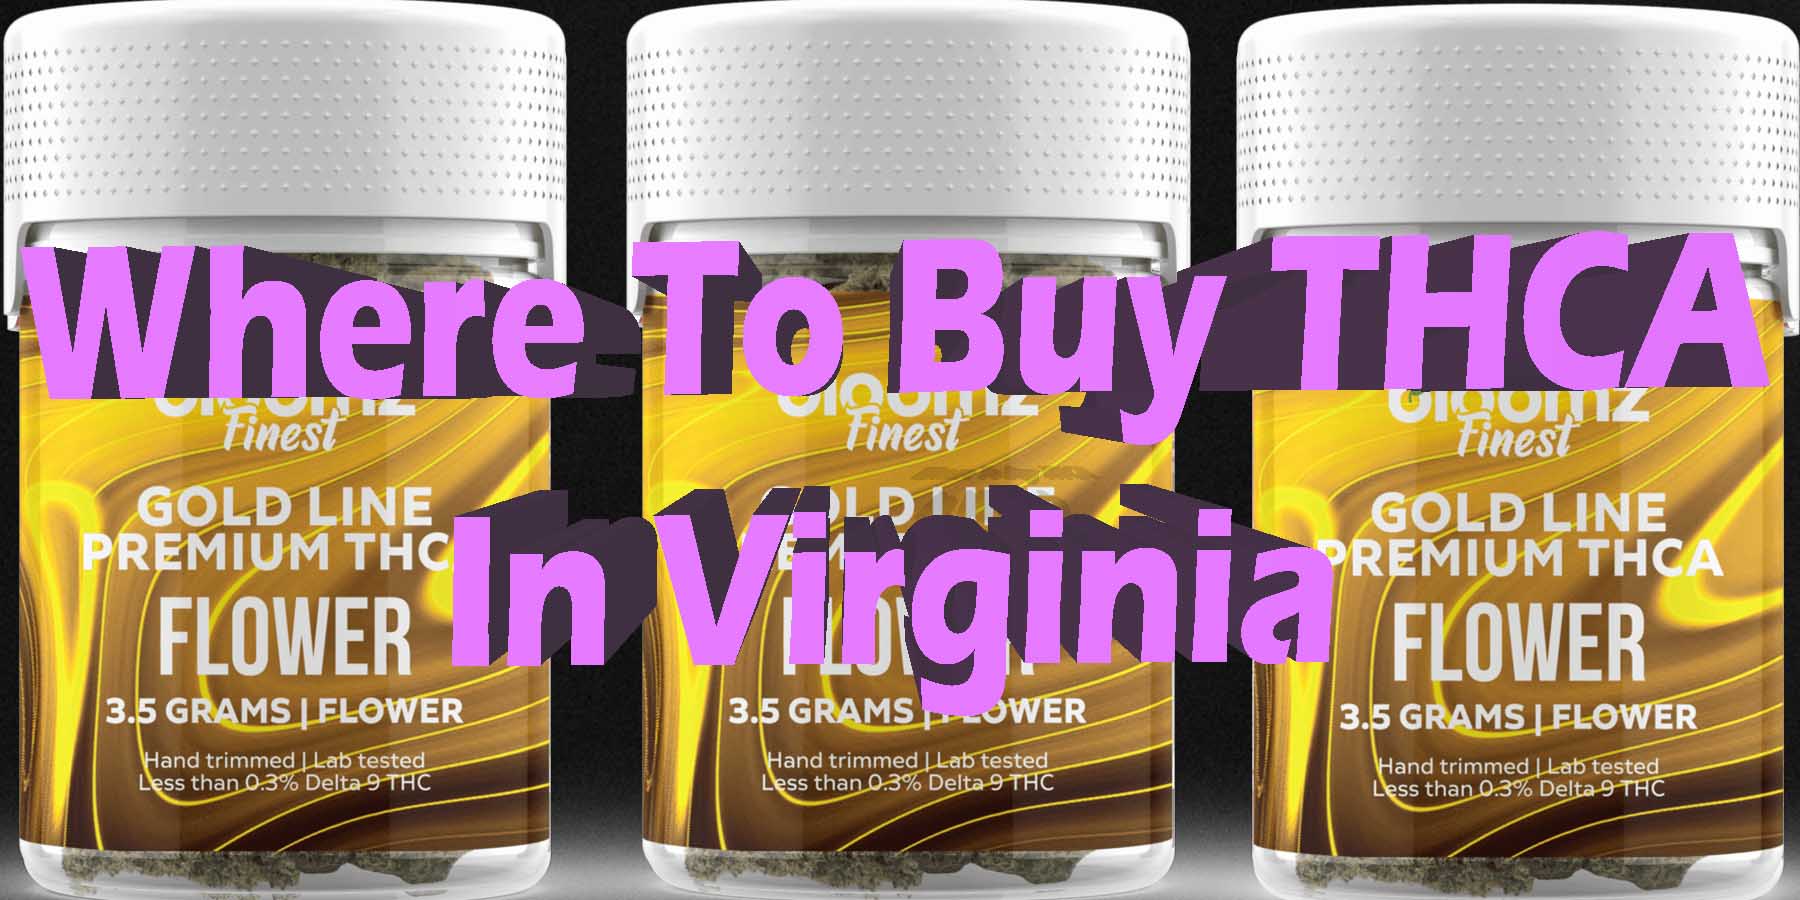 Where to Buy THCA in Virginia WhereToGet HowToGetNearMe BestPlace LowestPrice Coupon Discount For Smoking Best High Smoke Shop Online Near Me StrongestBrand BestBrand Binoid